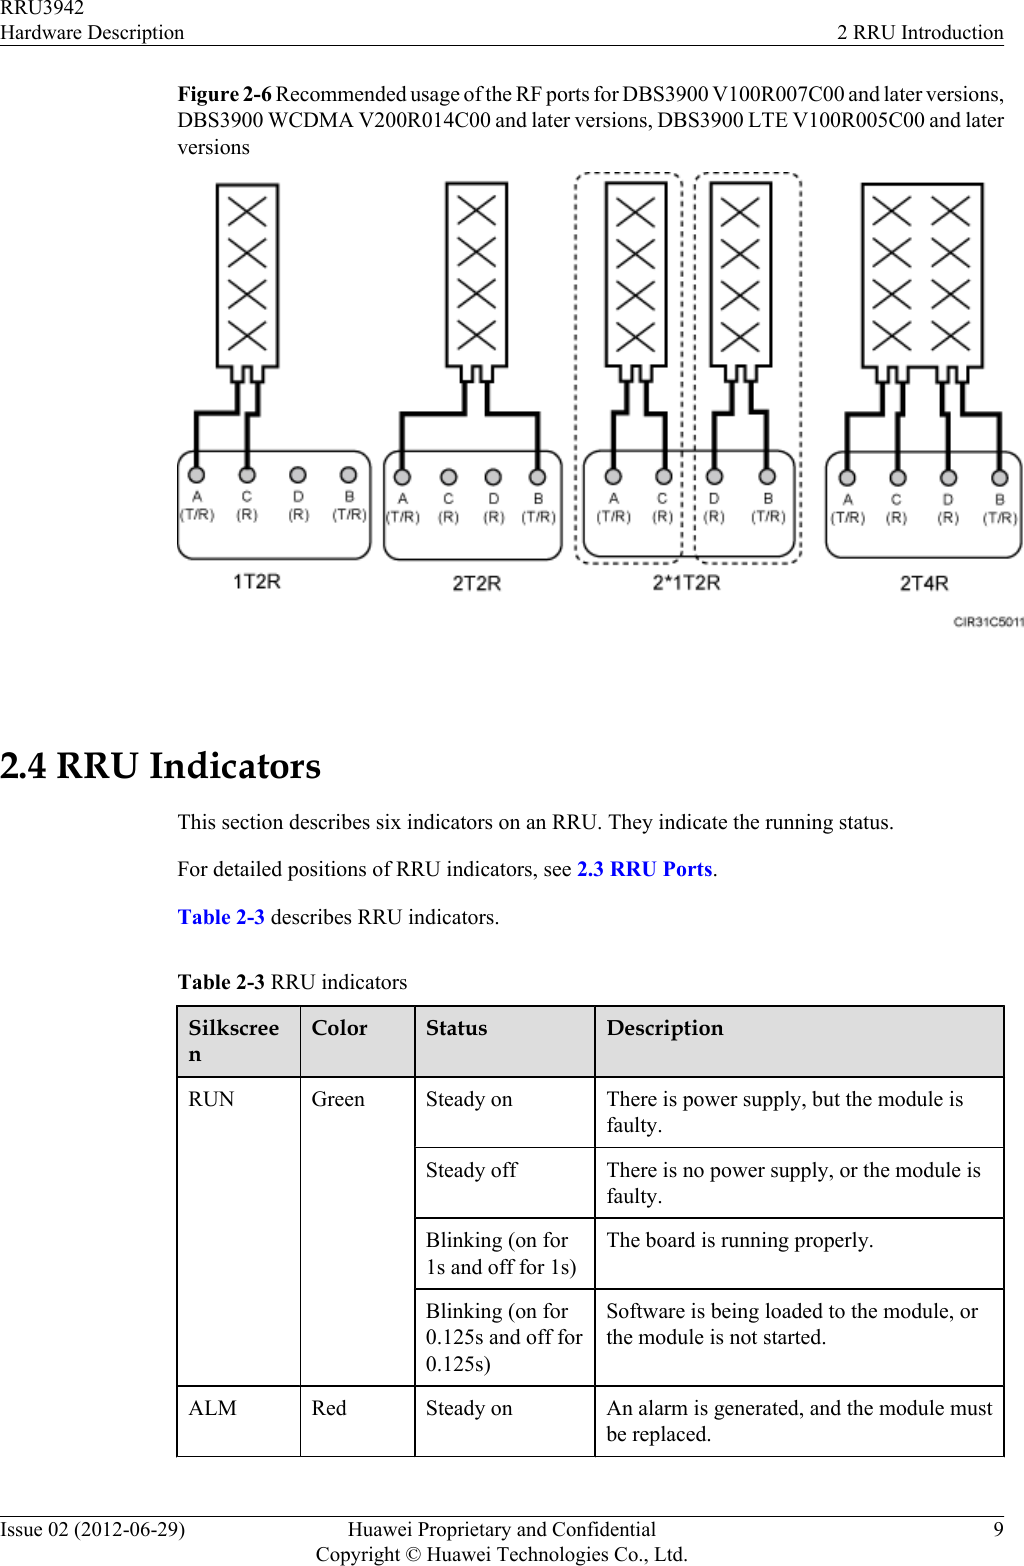 Figure 2-6 Recommended usage of the RF ports for DBS3900 V100R007C00 and later versions,DBS3900 WCDMA V200R014C00 and later versions, DBS3900 LTE V100R005C00 and laterversions 2.4 RRU IndicatorsThis section describes six indicators on an RRU. They indicate the running status.For detailed positions of RRU indicators, see 2.3 RRU Ports.Table 2-3 describes RRU indicators.Table 2-3 RRU indicatorsSilkscreenColor Status DescriptionRUN Green Steady on There is power supply, but the module isfaulty.Steady off There is no power supply, or the module isfaulty.Blinking (on for1s and off for 1s)The board is running properly.Blinking (on for0.125s and off for0.125s)Software is being loaded to the module, orthe module is not started.ALM Red Steady on An alarm is generated, and the module mustbe replaced.RRU3942Hardware Description 2 RRU IntroductionIssue 02 (2012-06-29) Huawei Proprietary and ConfidentialCopyright © Huawei Technologies Co., Ltd.9